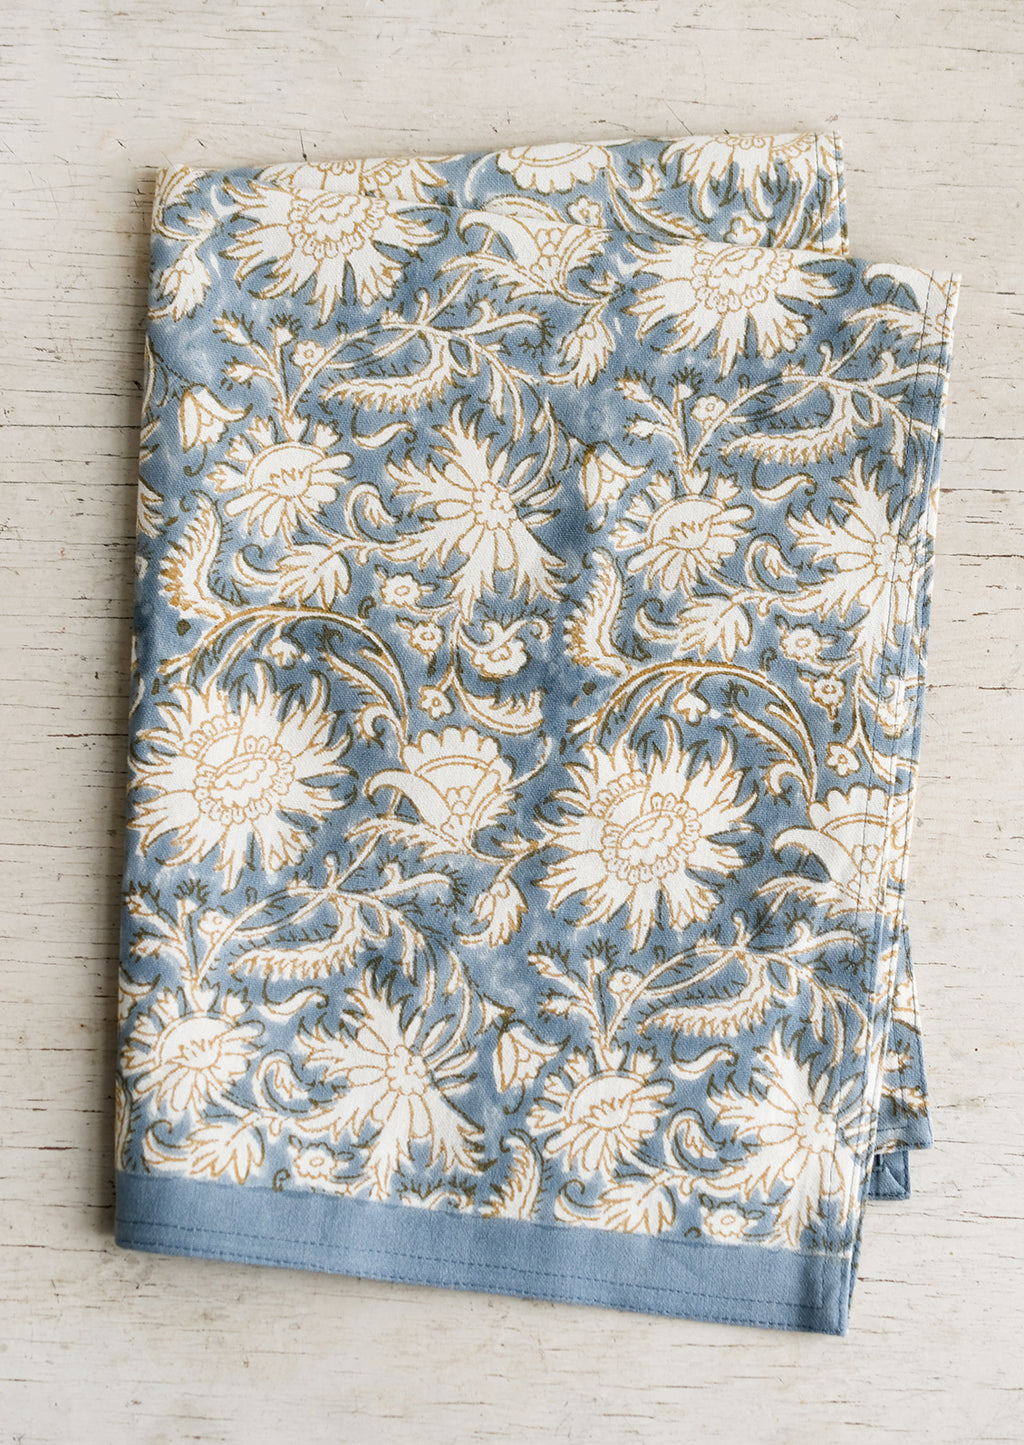 1: A block printed tea towel with floral pattern in blue, white and tan.